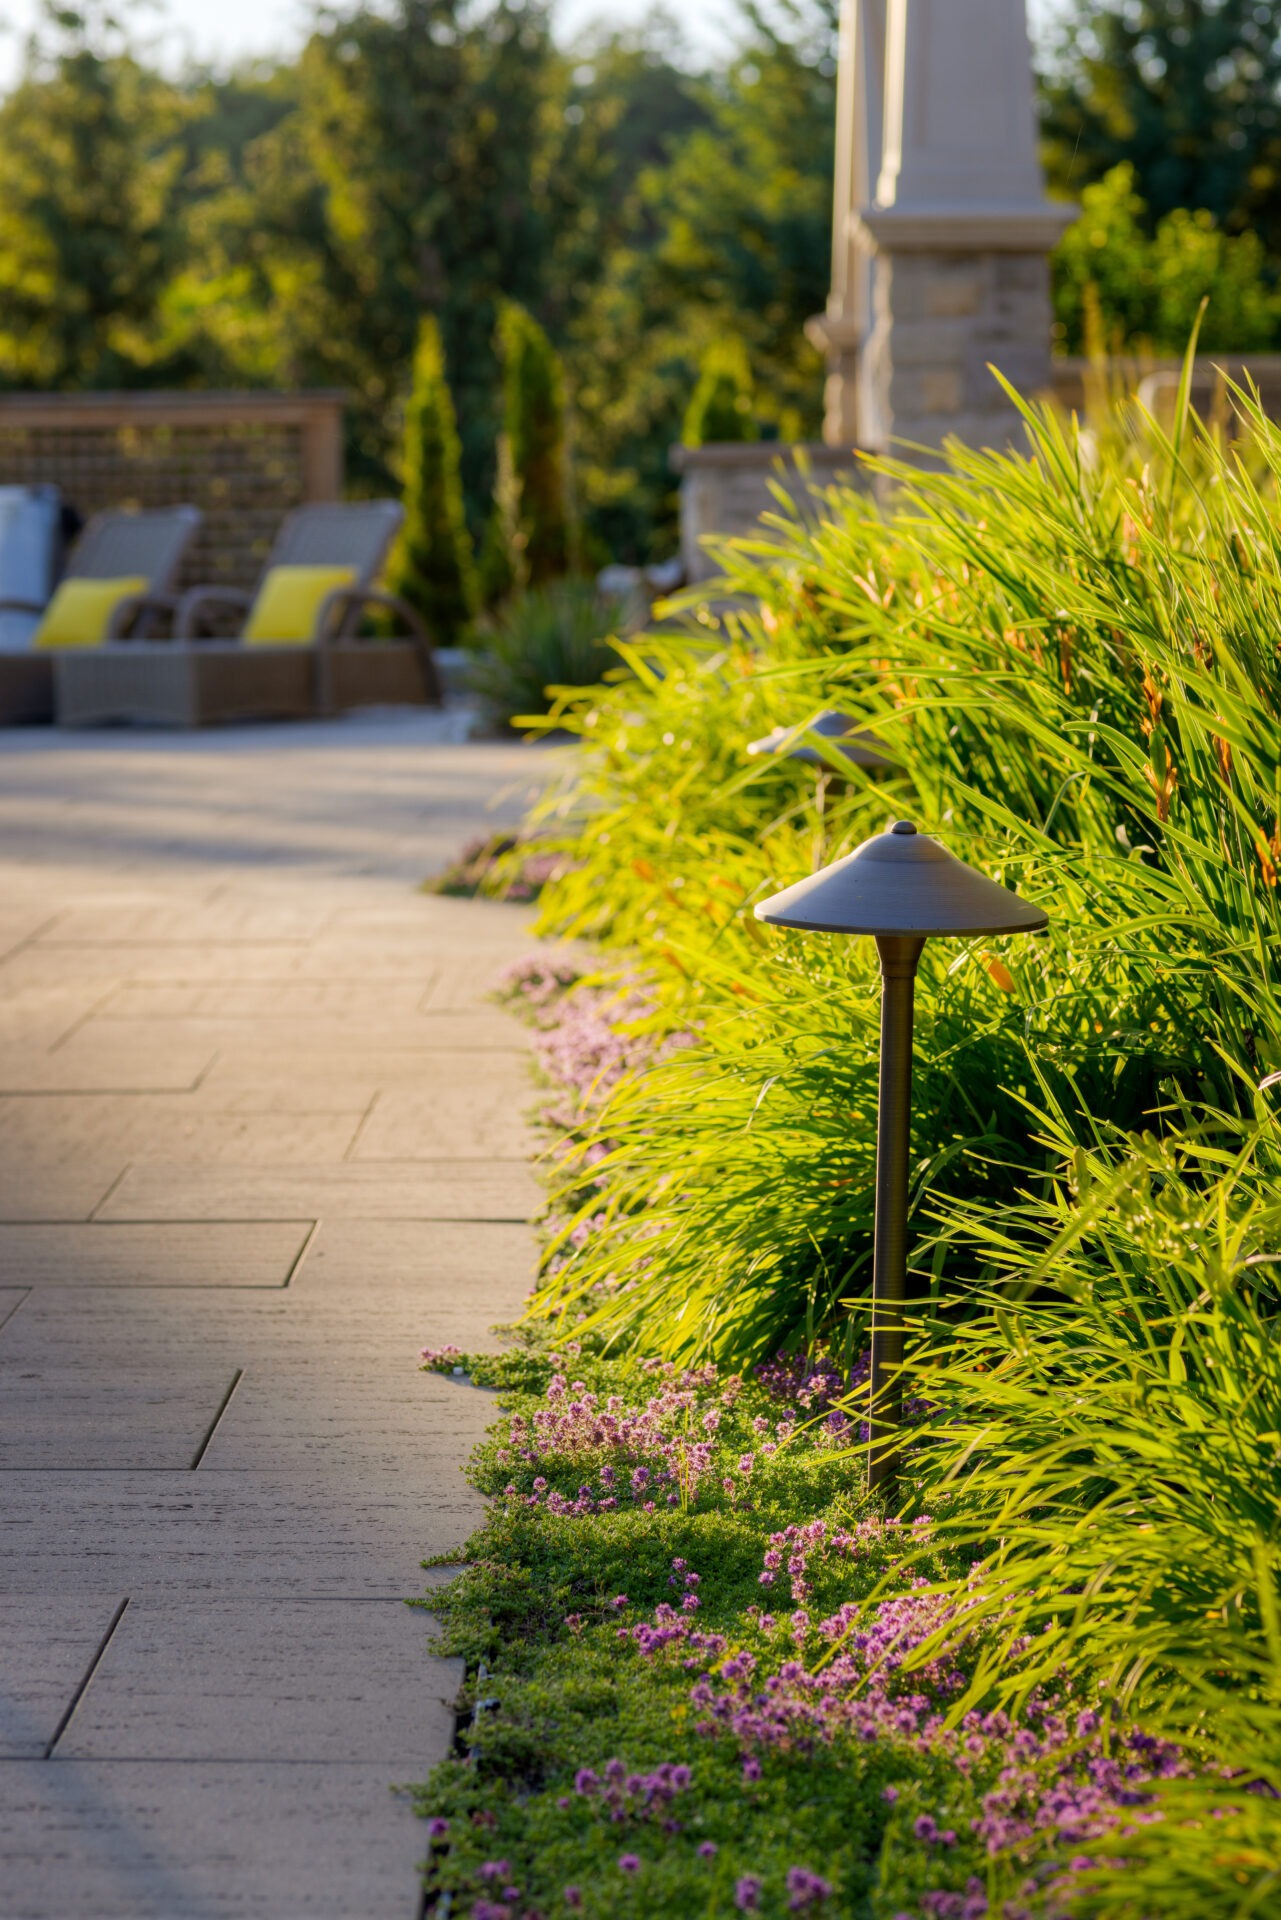 A peaceful garden path lined with lush greenery, ornamental grasses, and purple flowers, featuring a pathway light and distant outdoor lounge chairs.